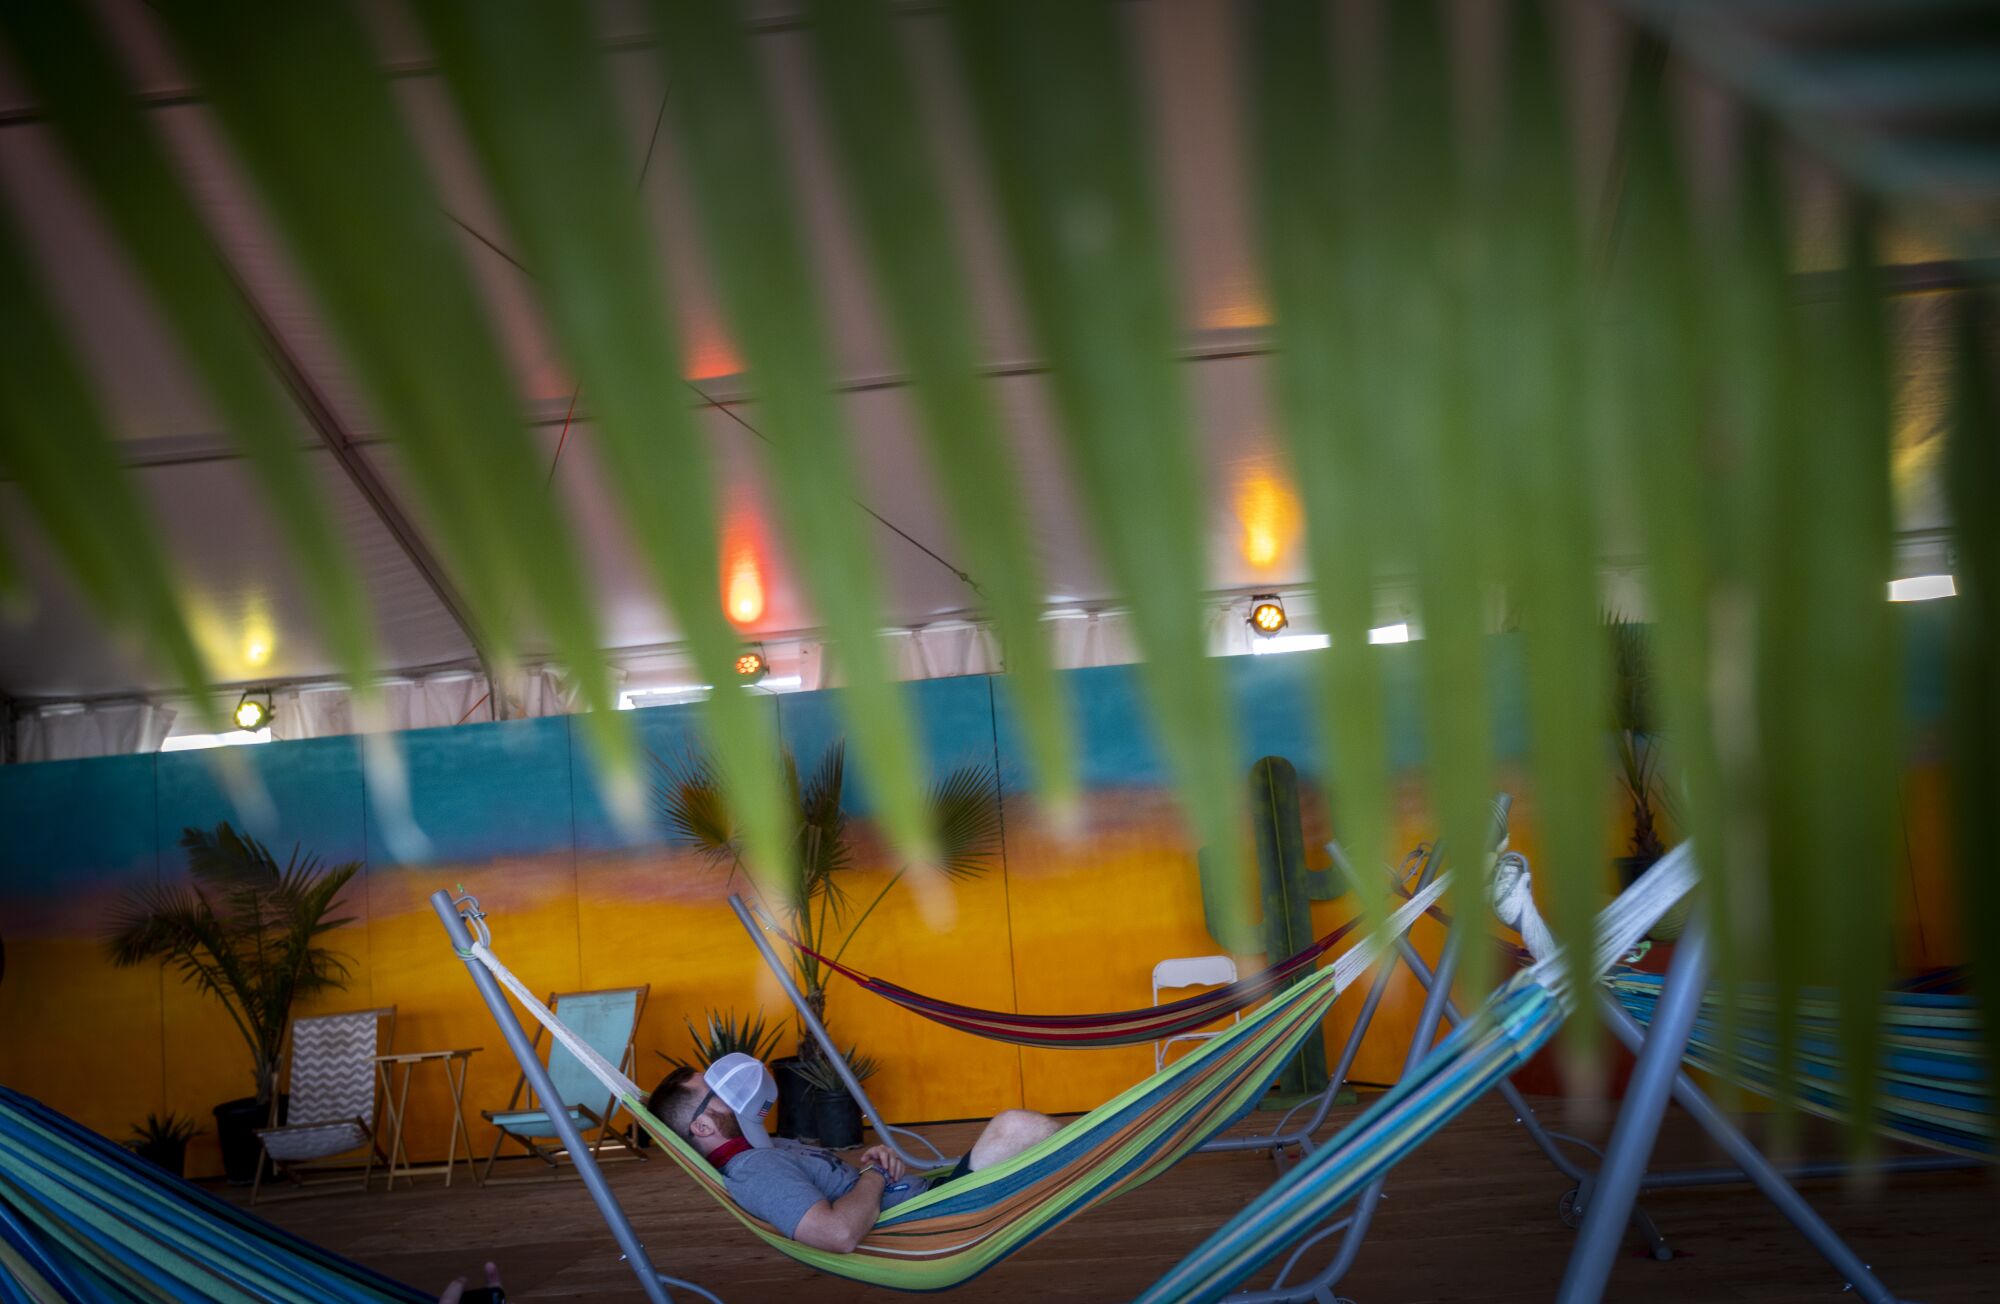 A person rests on a hammock